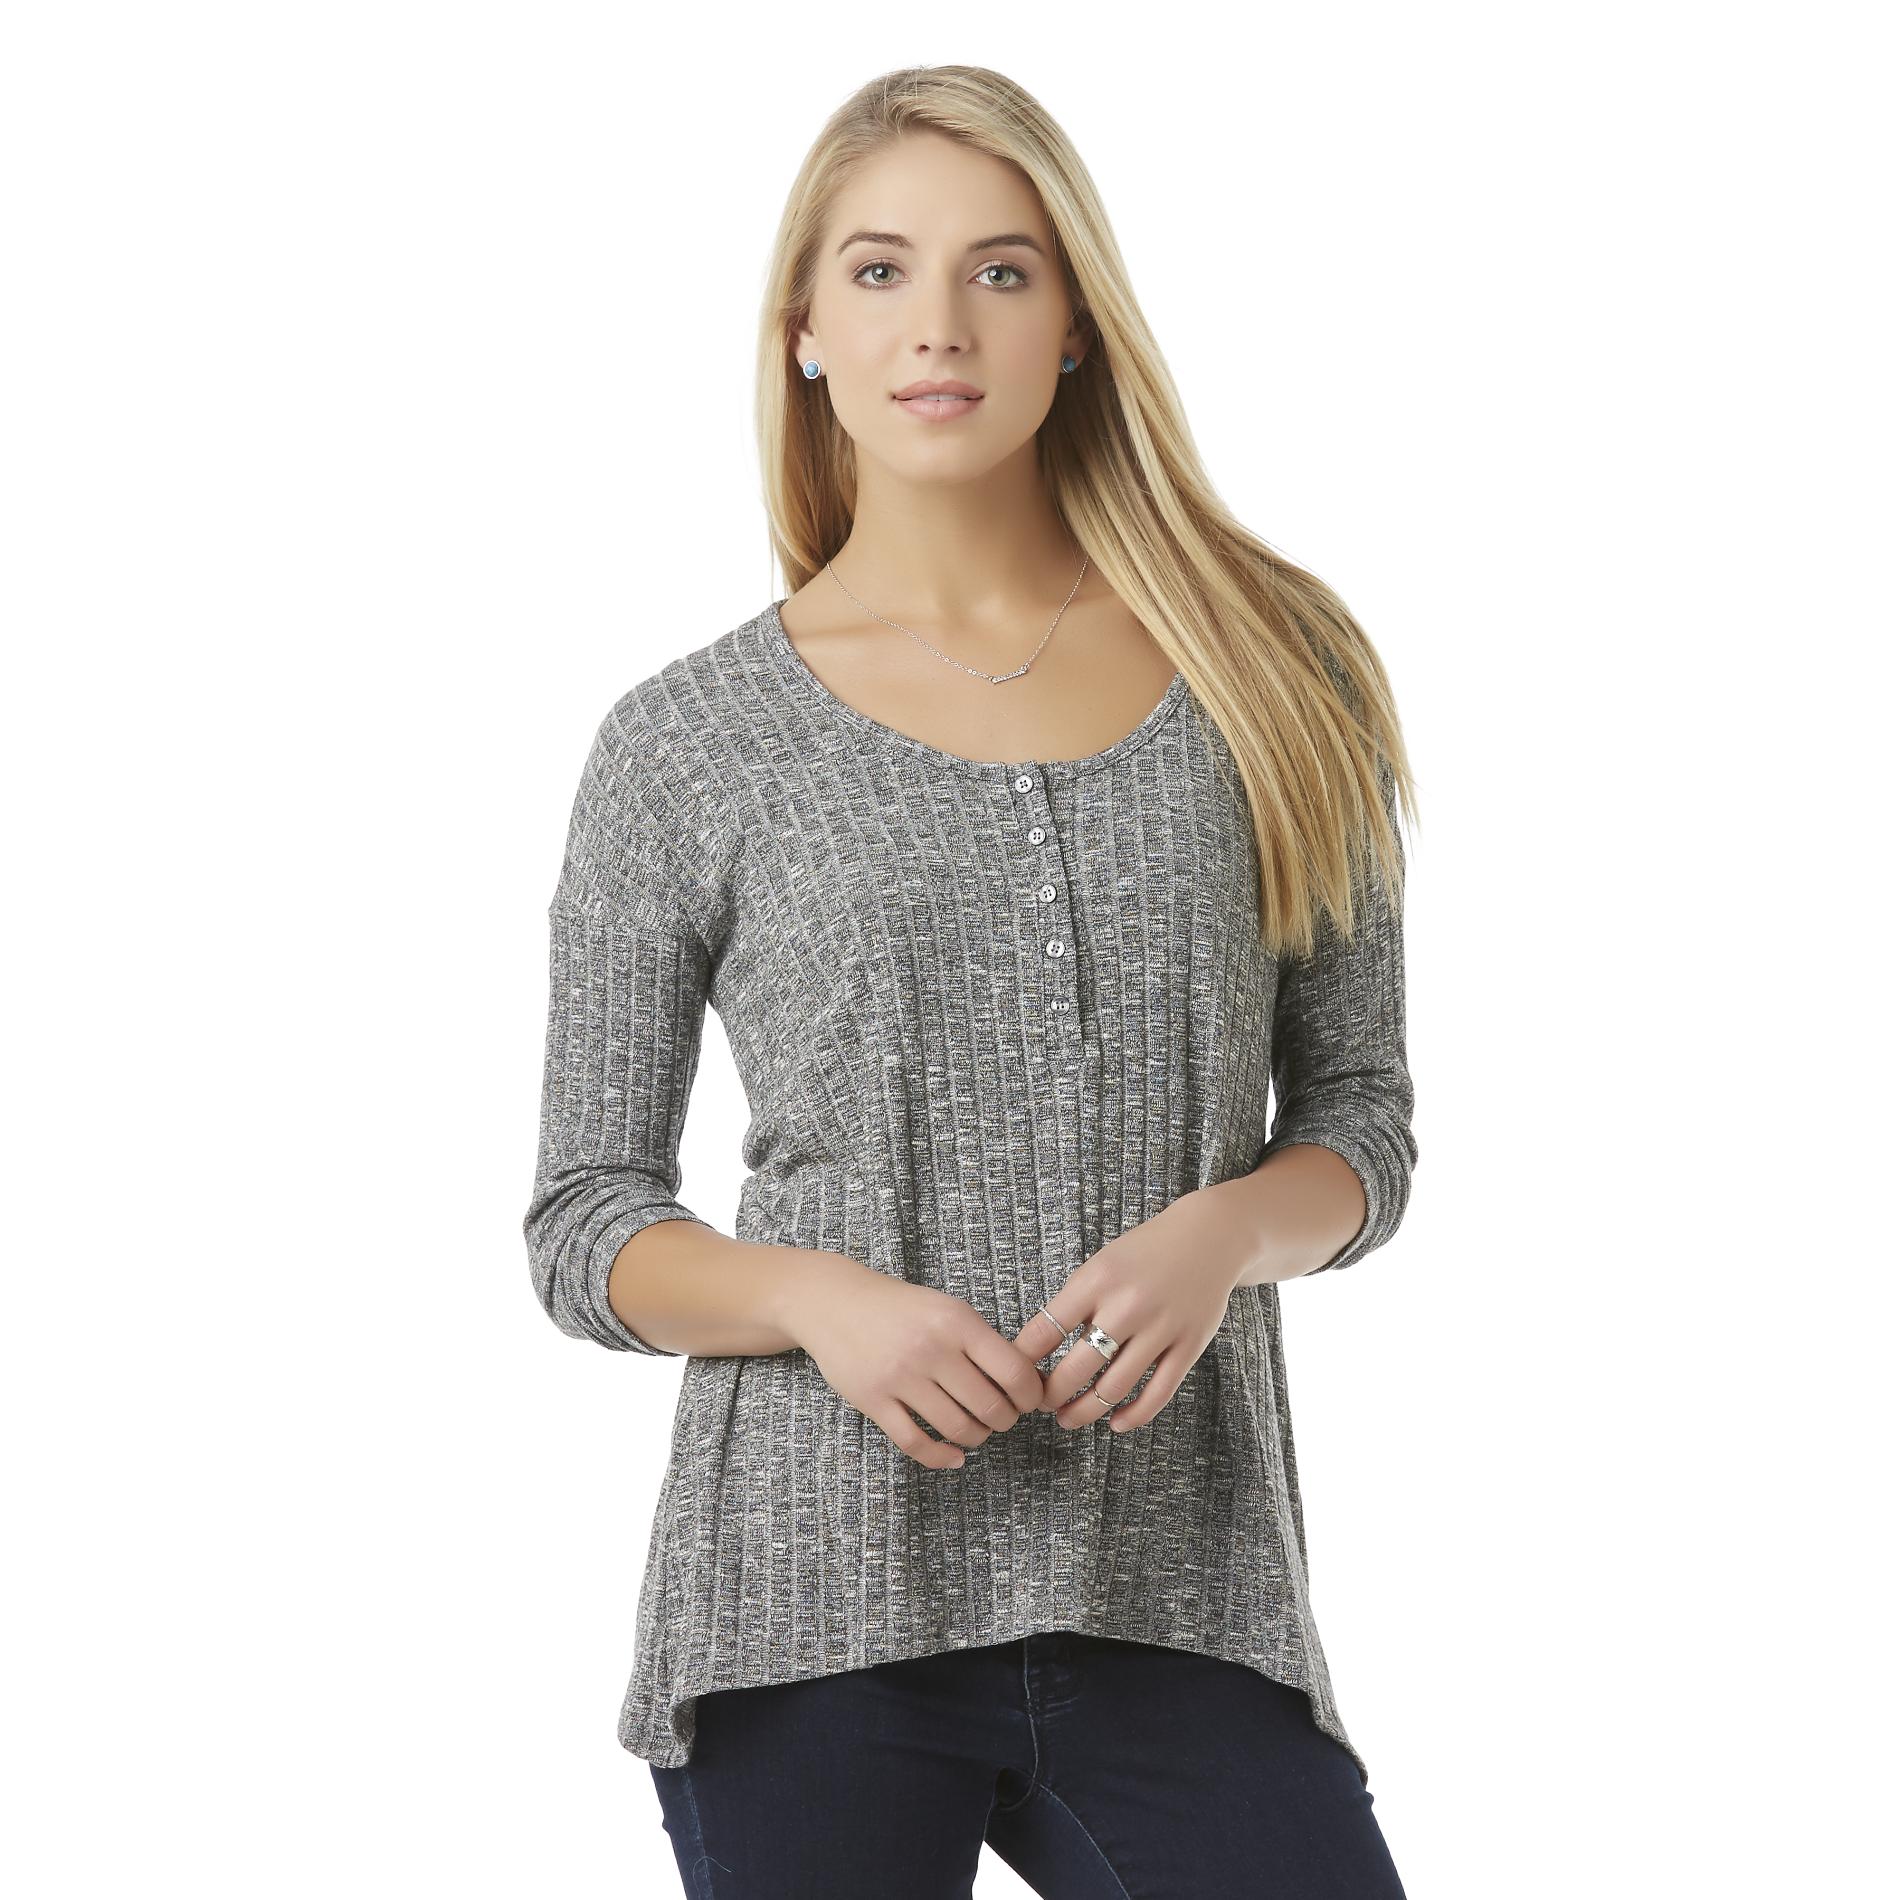 Simply Styled Women's Swing Top